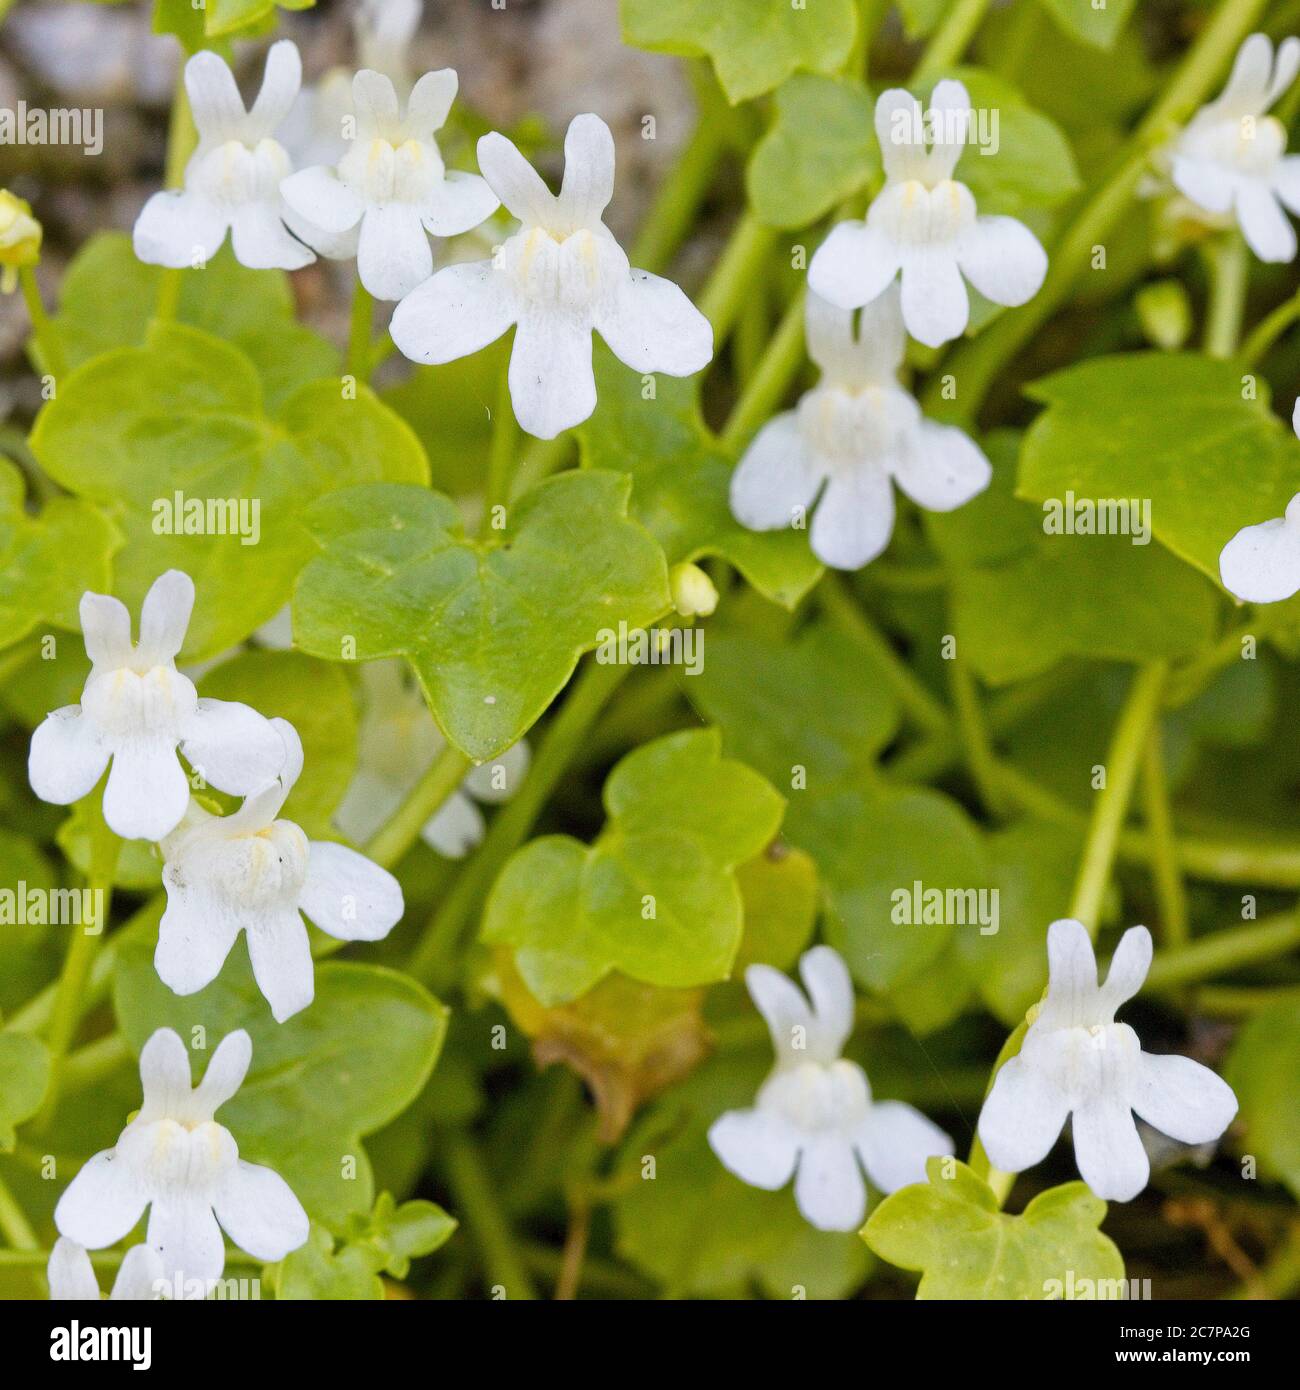 Ivy-leaved Toadflax (Cymbalaria muralis), white form in flower, Penzance, Cornwall, UK. Stock Photo